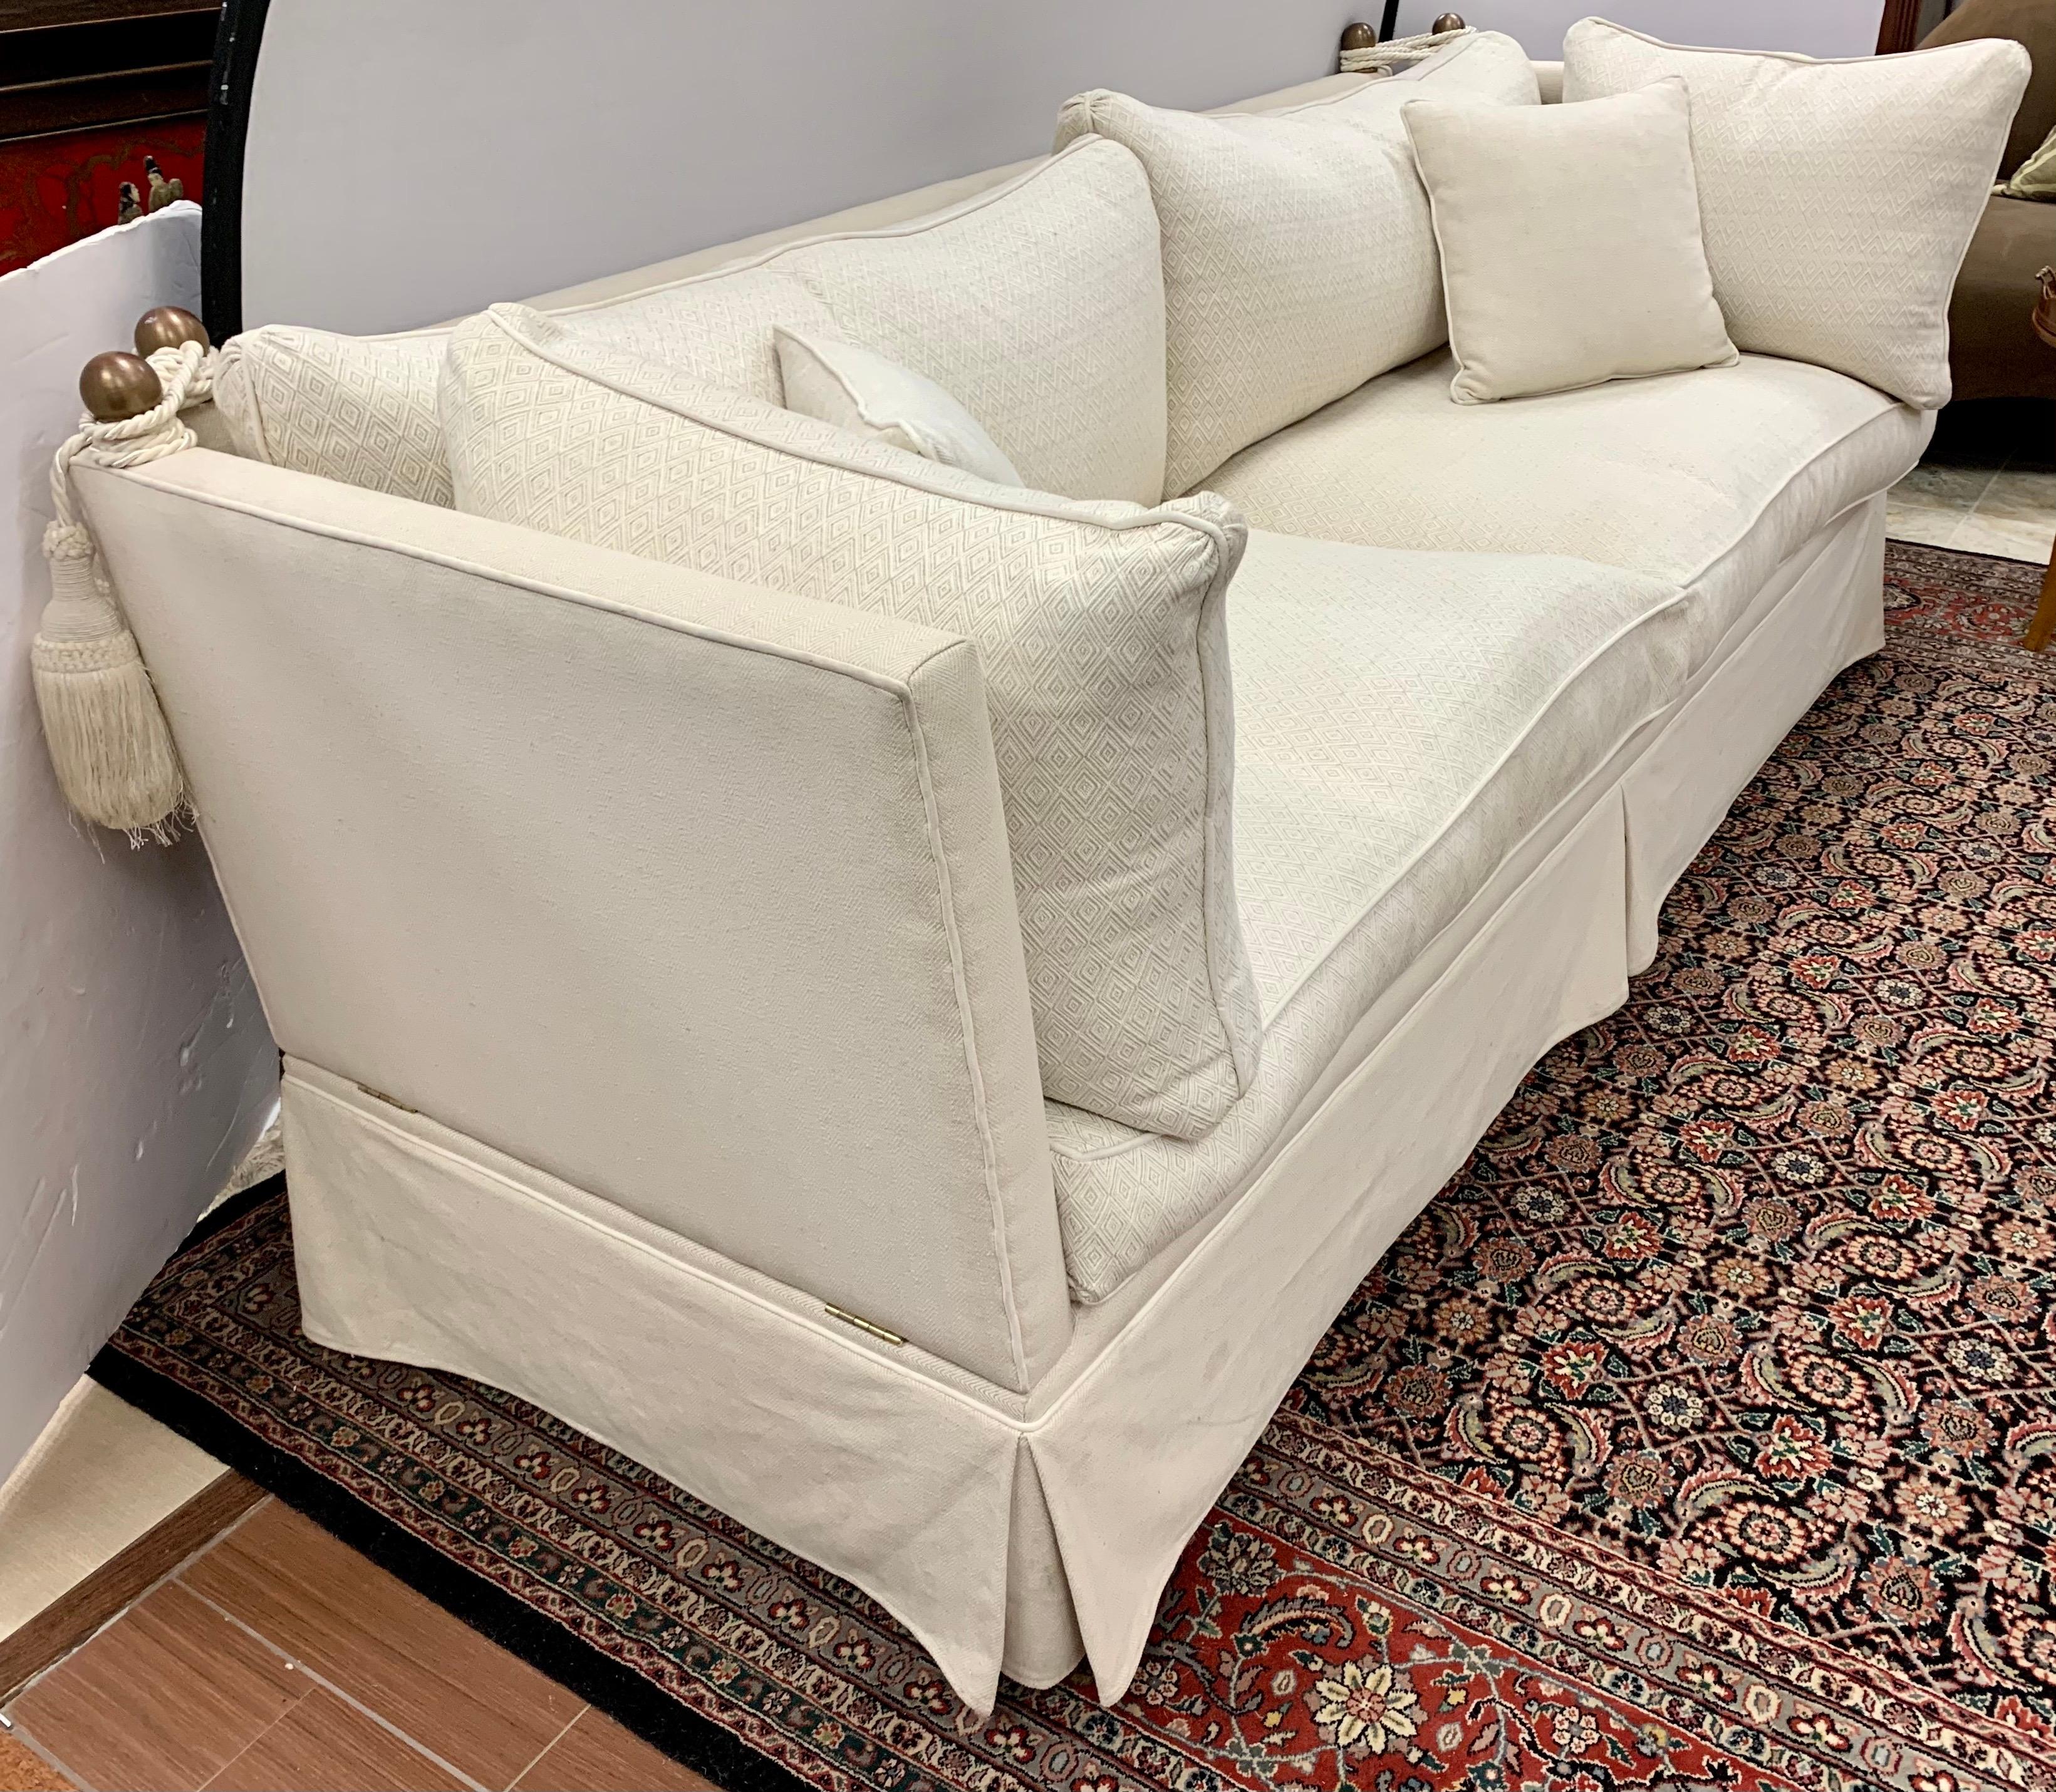 Elegant Knole sofa with adjustable arms, deep seating and off-white upholstery. The cushions have a subtle diamond pattern and the backs and sides have a herringbone pattern. The traditional Knole sofa has drop arms and heavy decorative braid tie